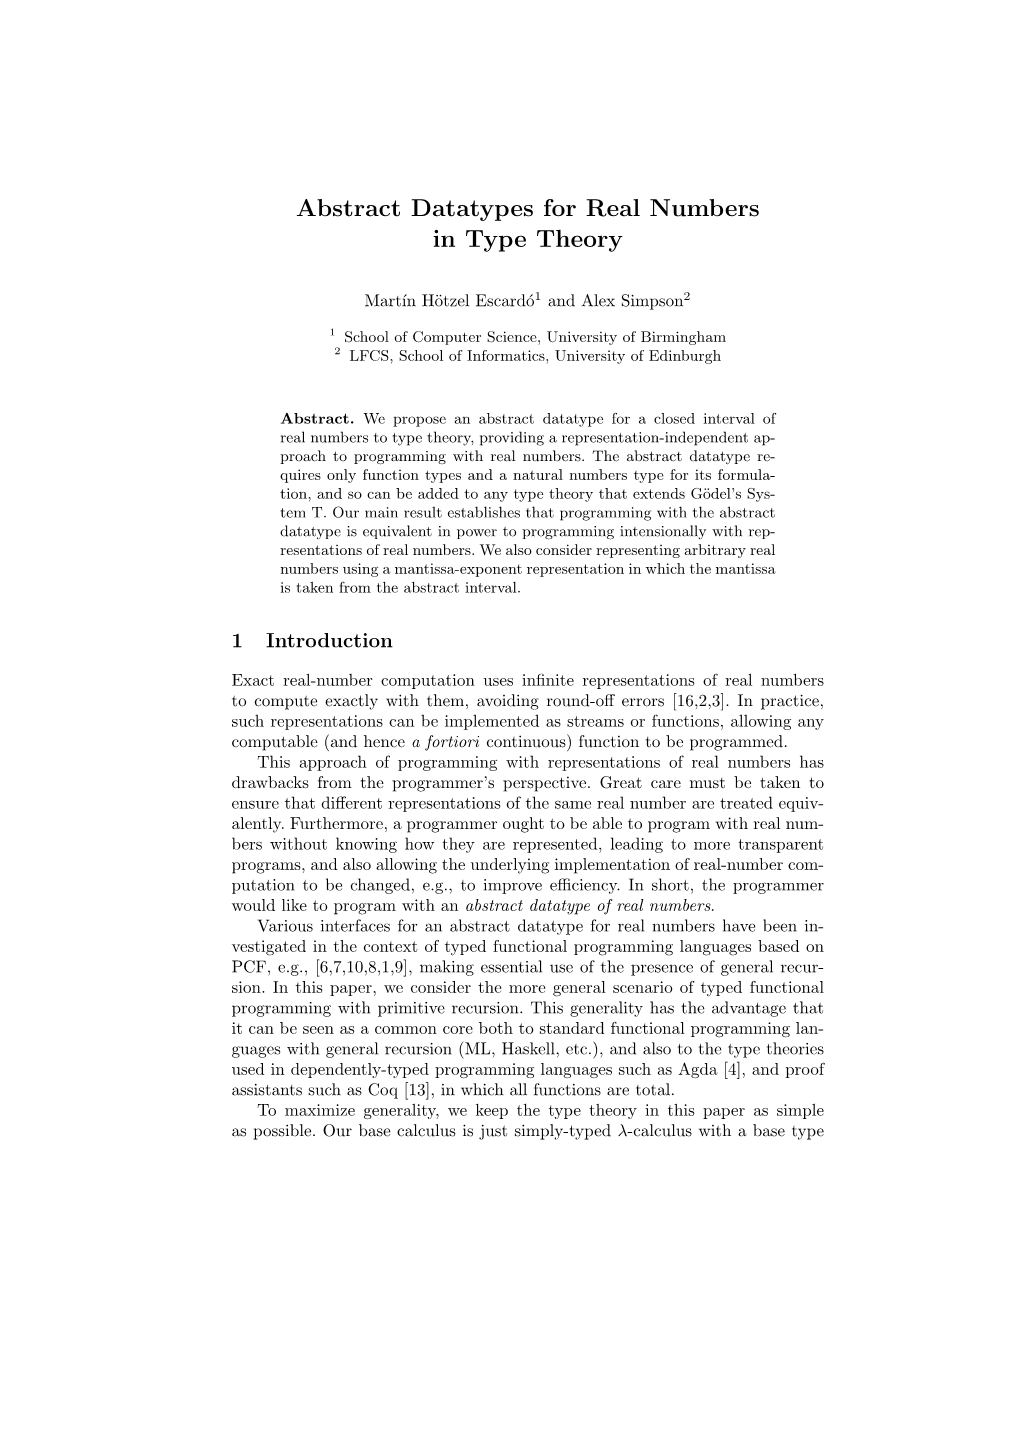 Abstract Datatypes for Real Numbers in Type Theory